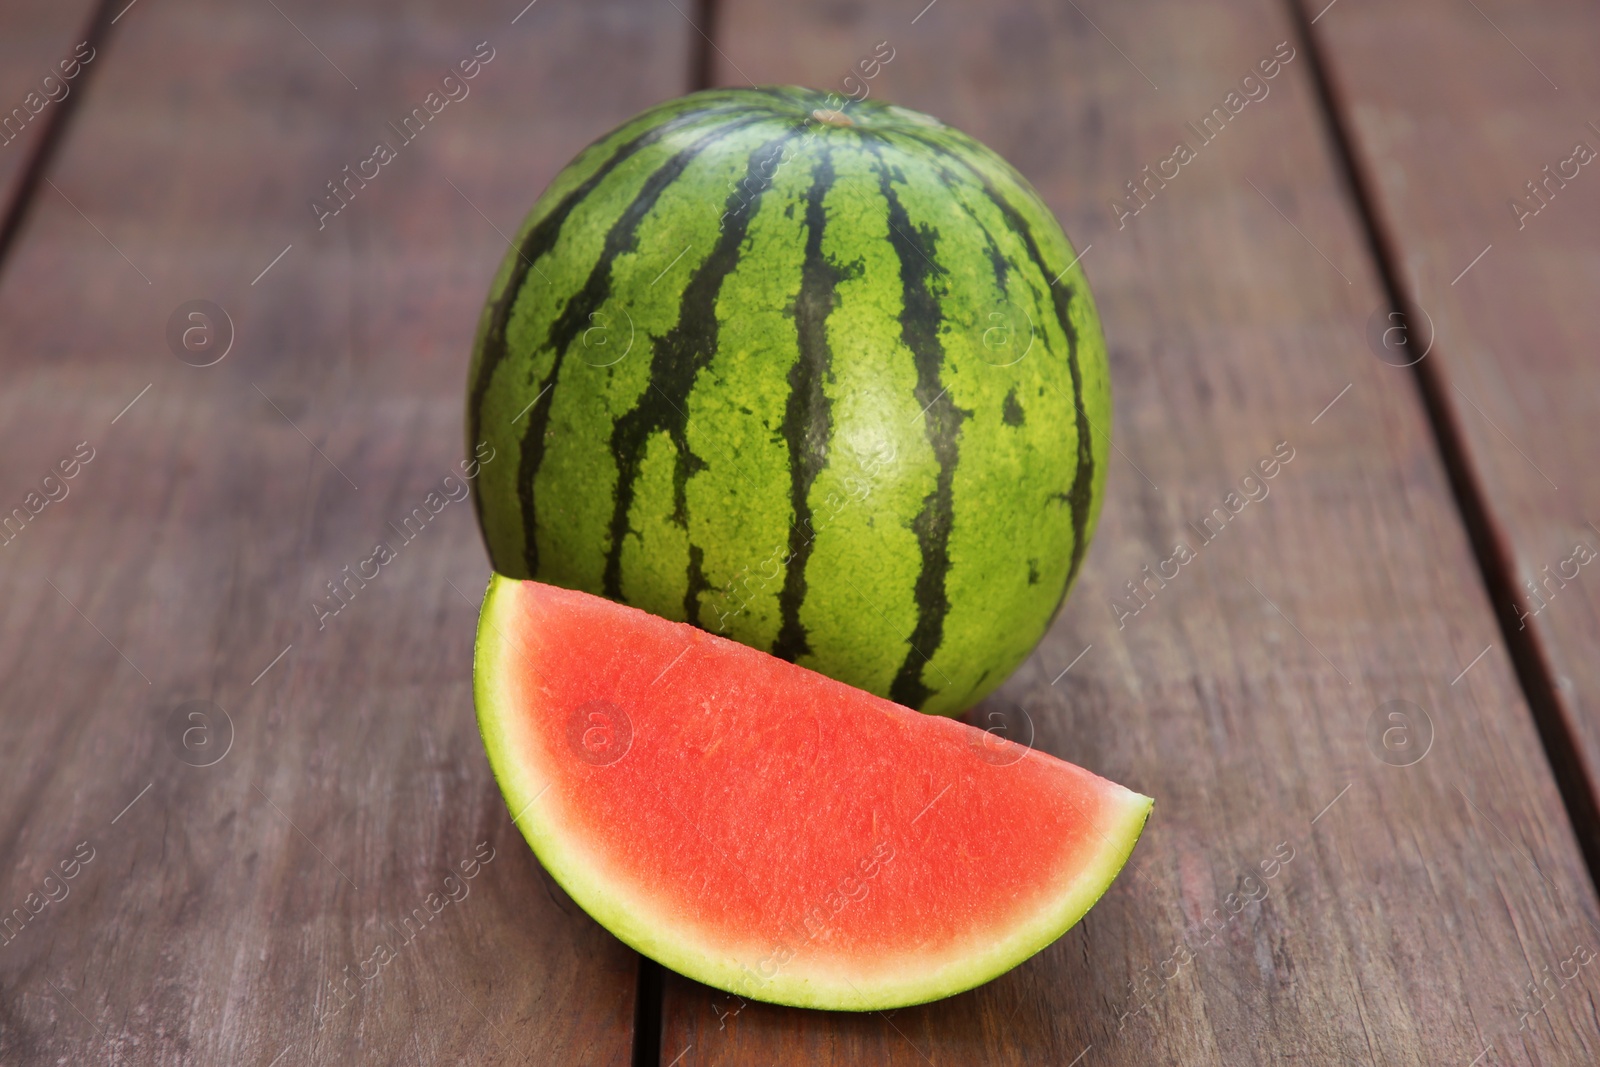 Photo of Whole and cut delicious ripe watermelons on wooden table